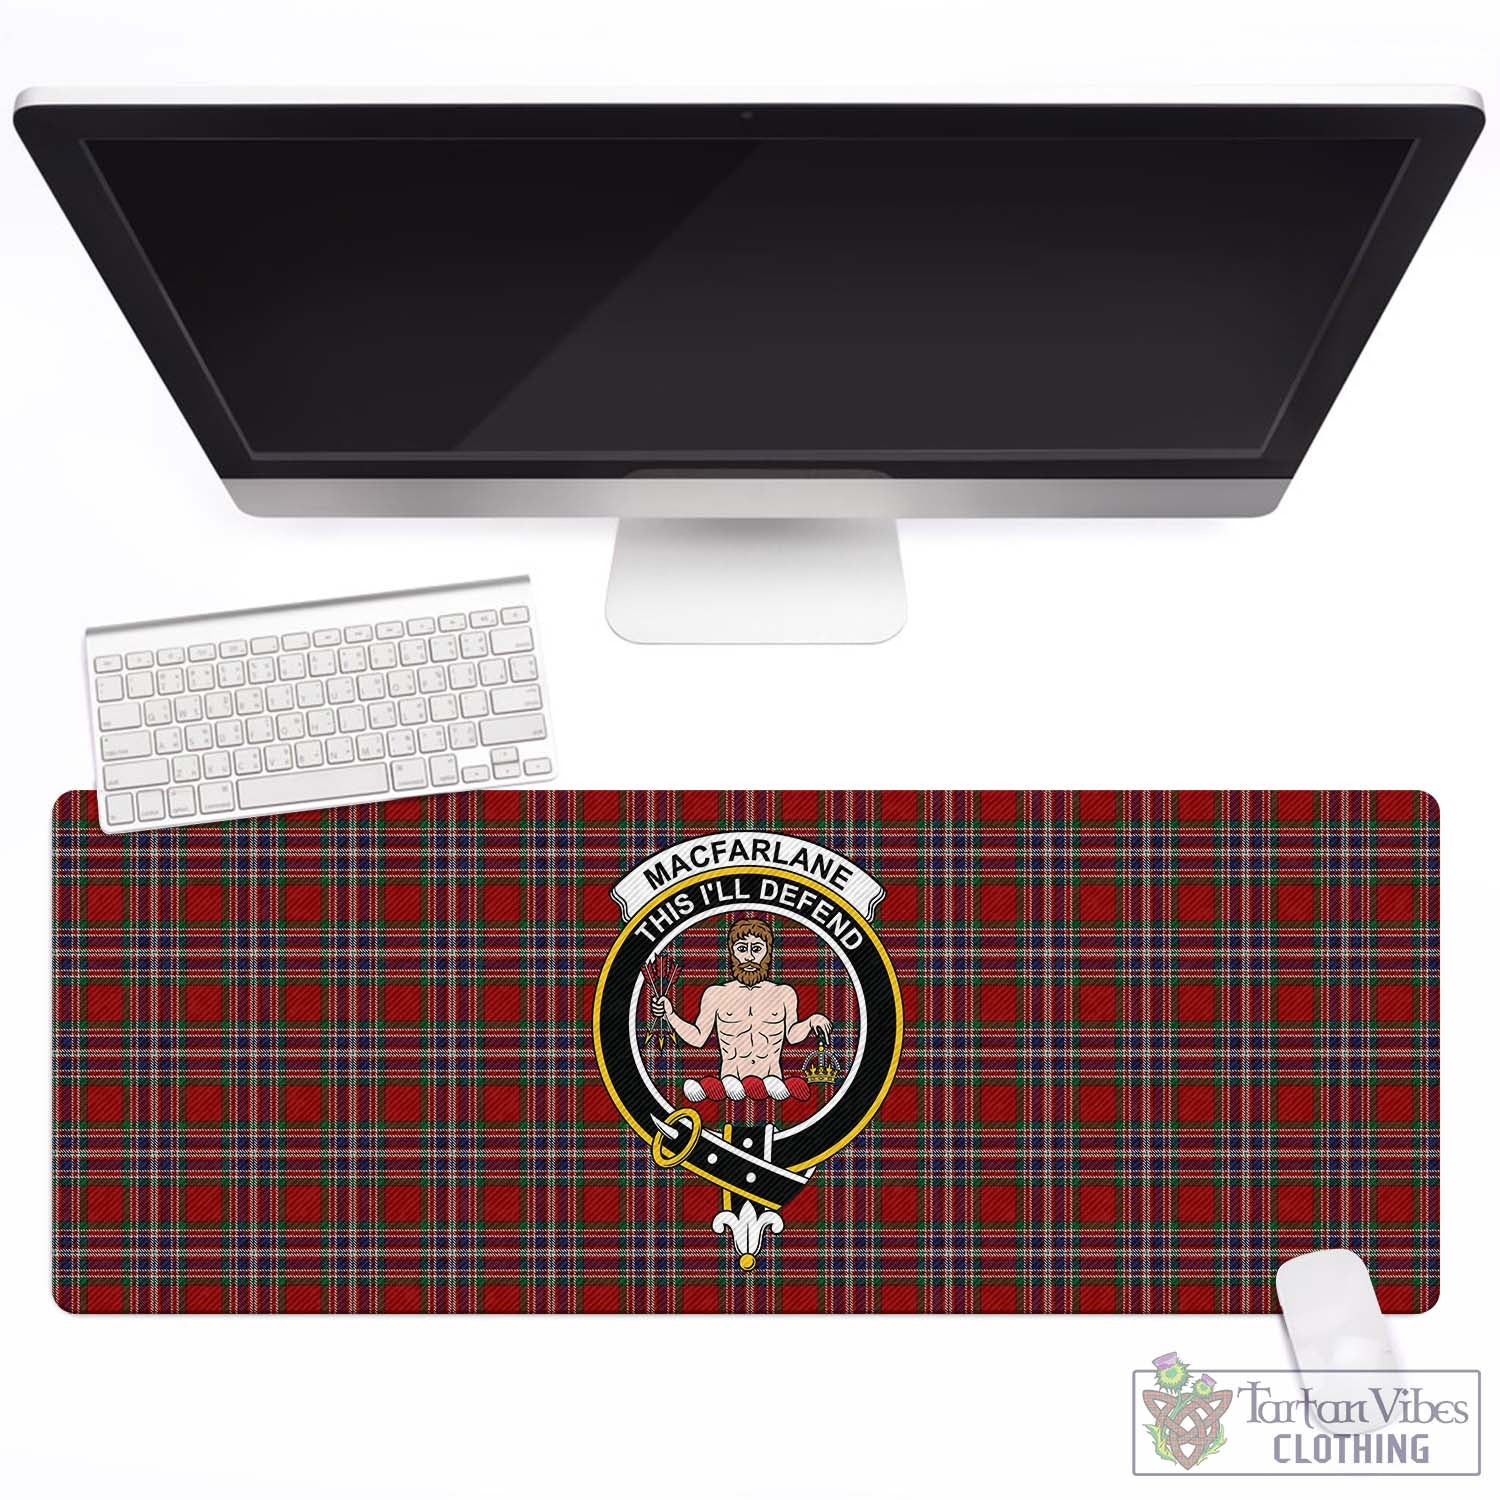 Tartan Vibes Clothing MacFarlane Red Tartan Mouse Pad with Family Crest